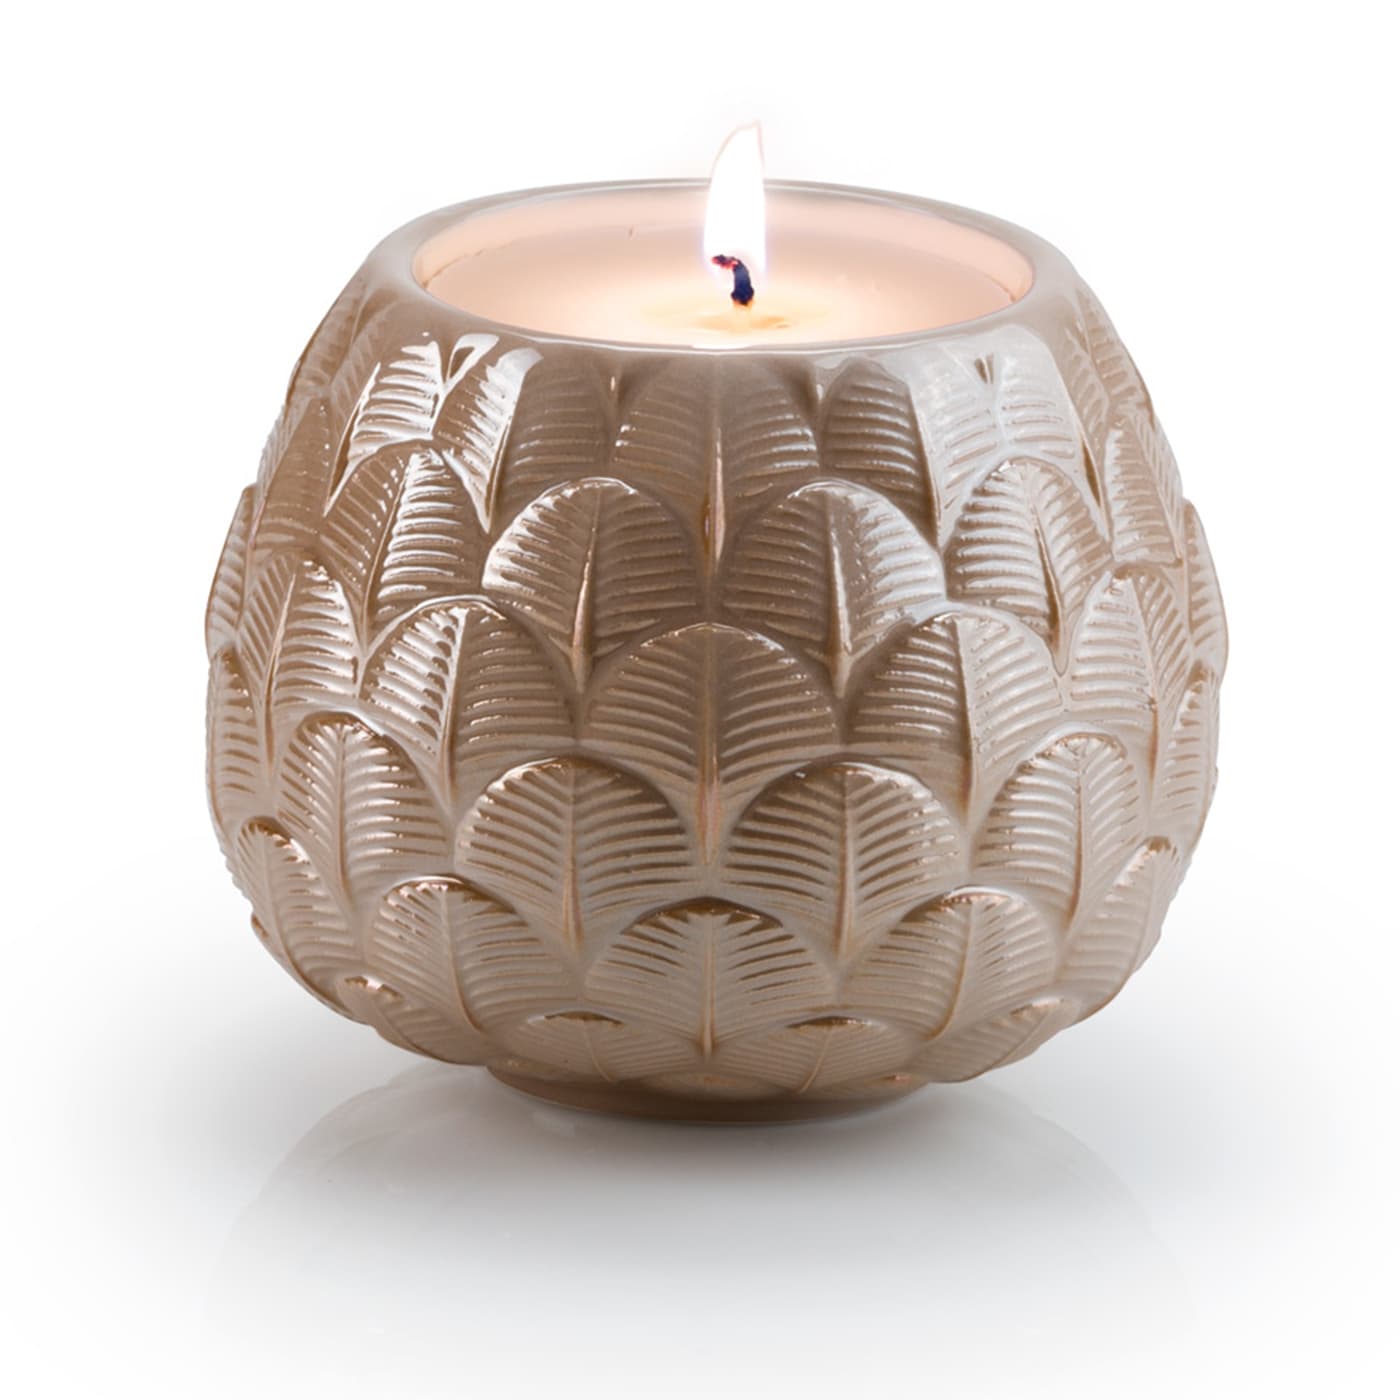 CHARLOTTE PEACOCK CANDLE COVER - BEIGE Villari Home Couture